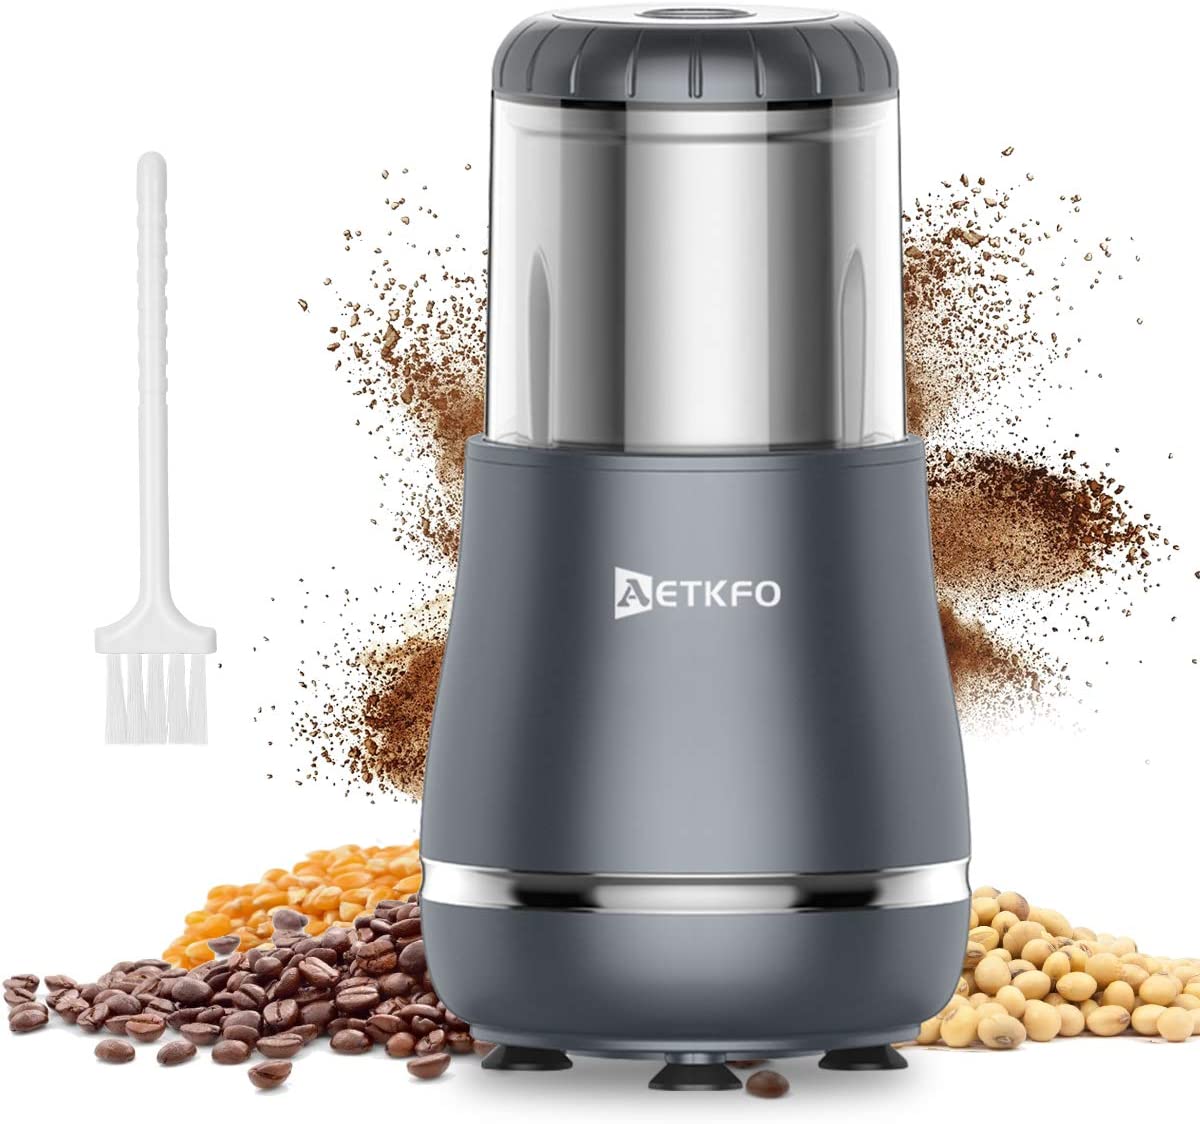 AETKFO Coffee Grinder, 300 W Electric Coffee Grinder, Coffee Beans, Nuts, Spices, Grain Mill with Stainless Steel Knife, 200 g Capacity for Coffee Beans, Spices, Grain Nuts (Silver)